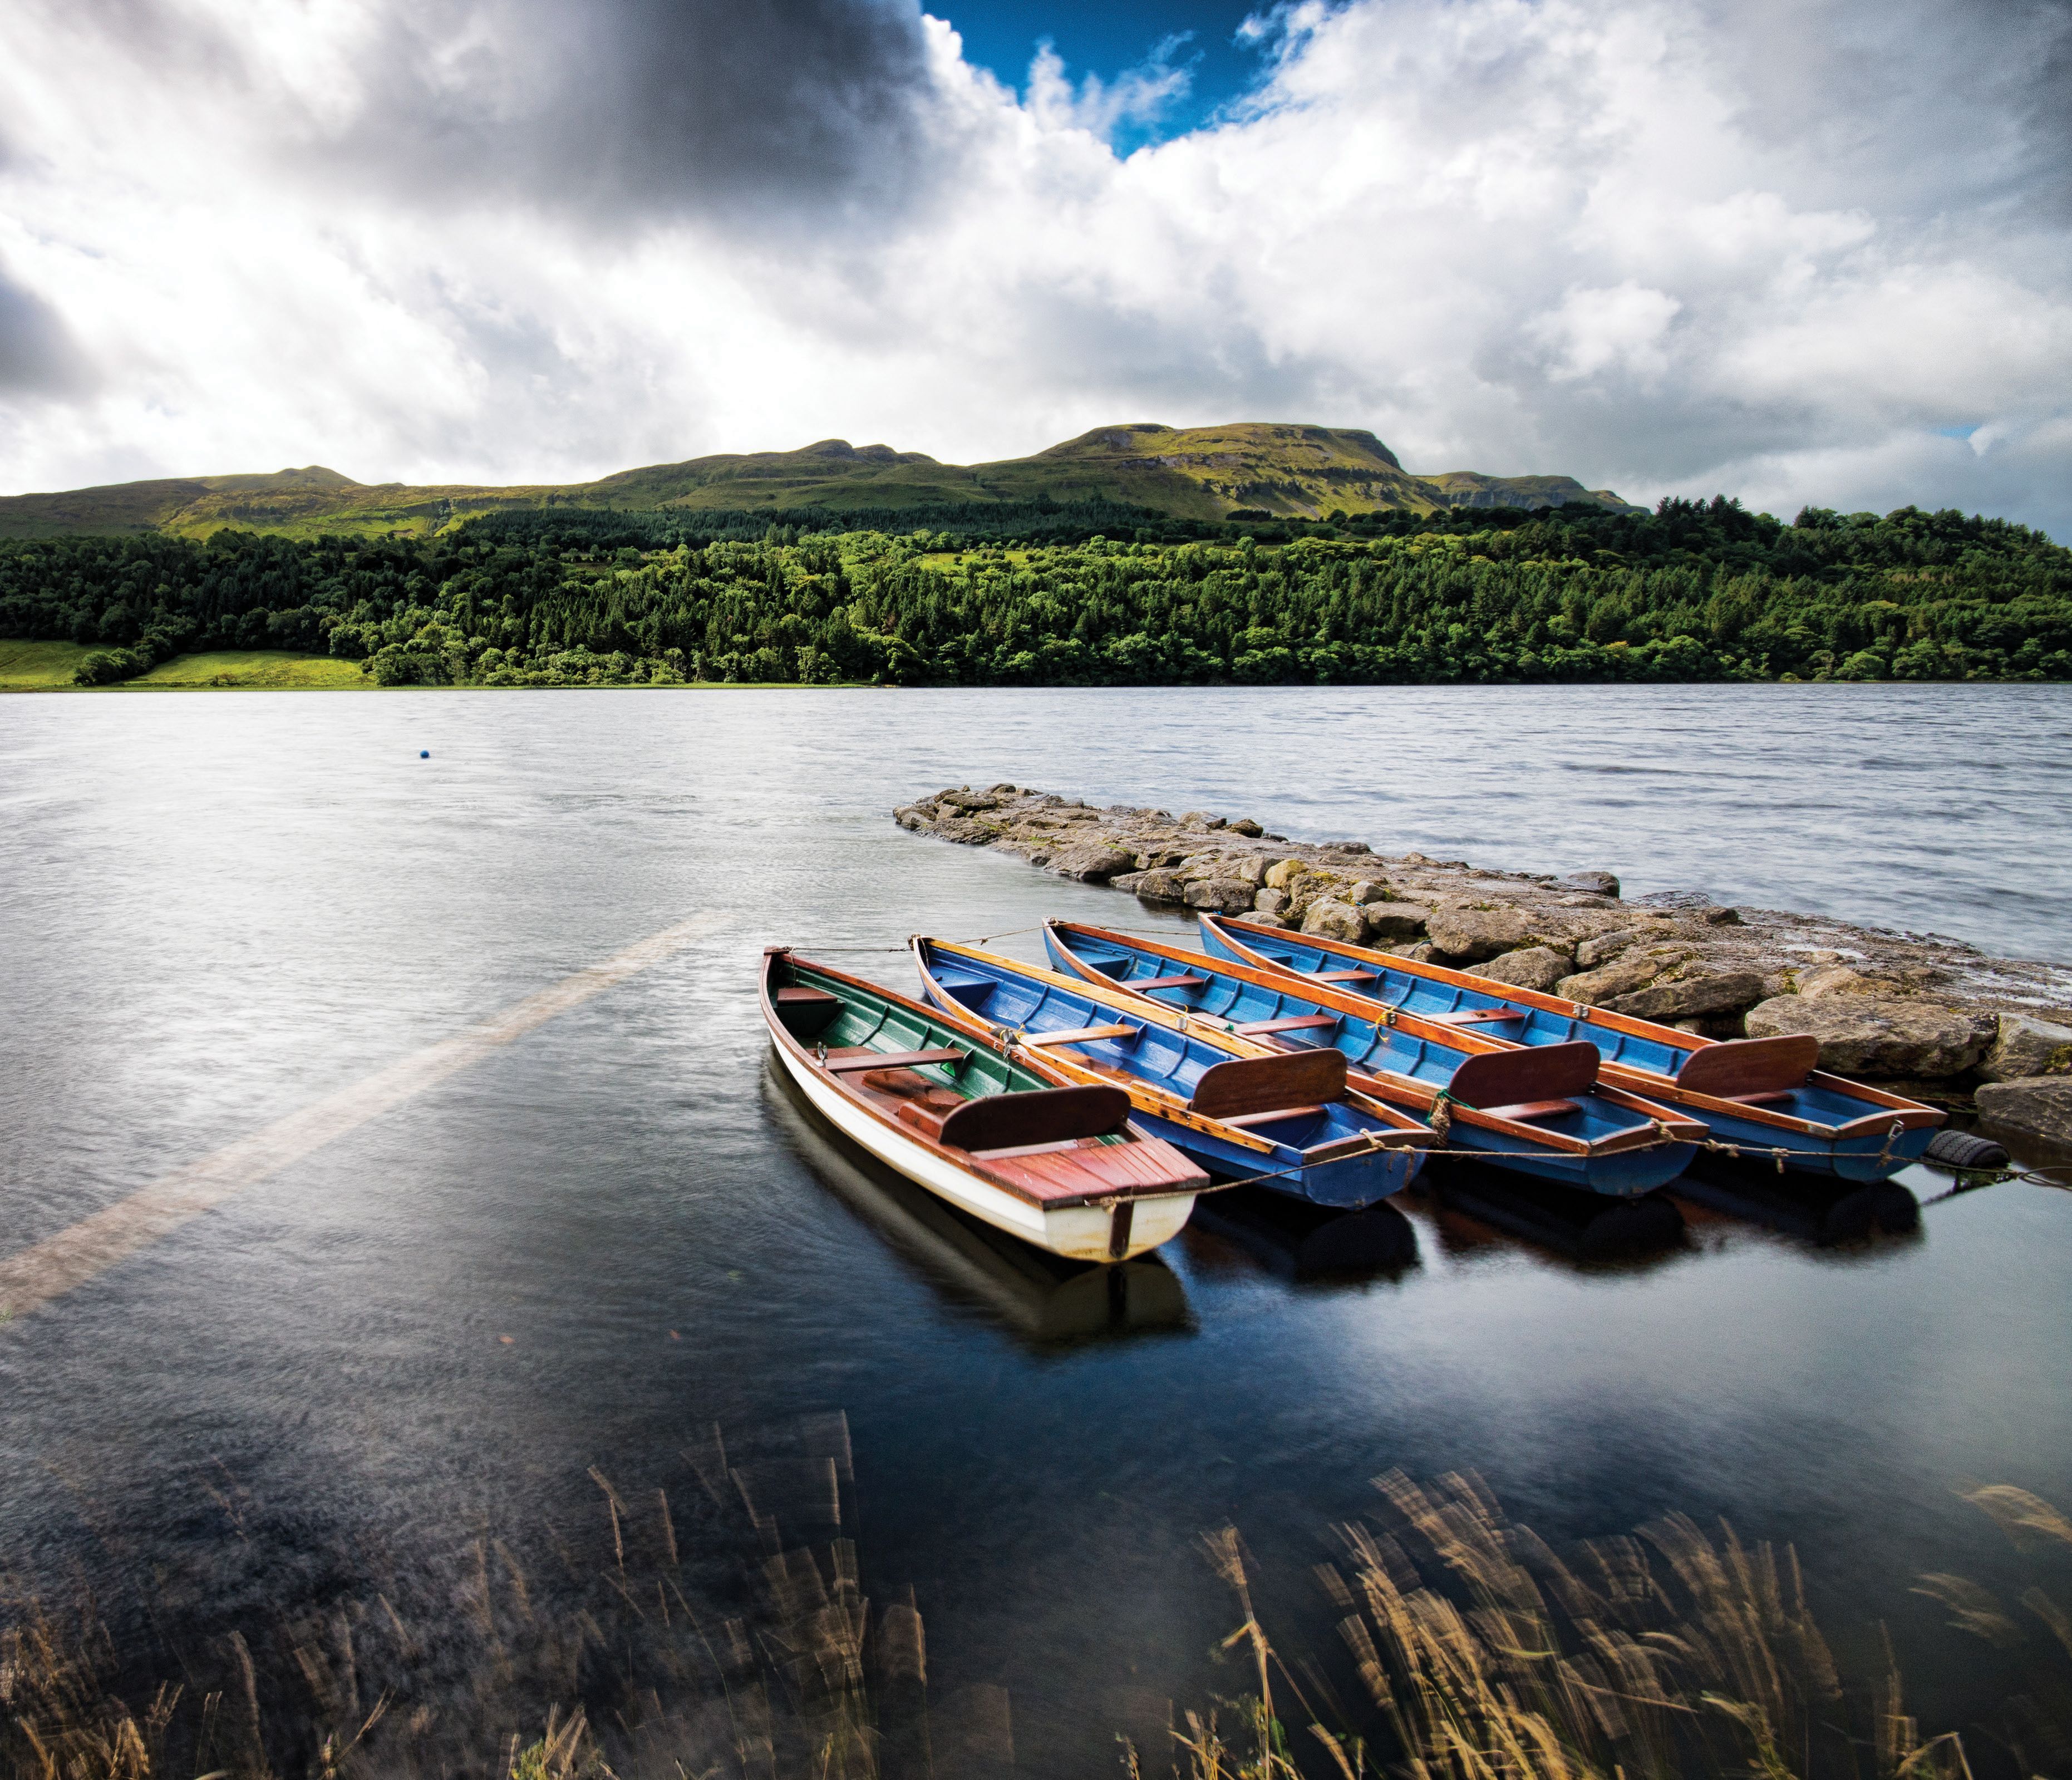 The green mountains of Sligo and Leitrim will replenish your soul and refill your imagination